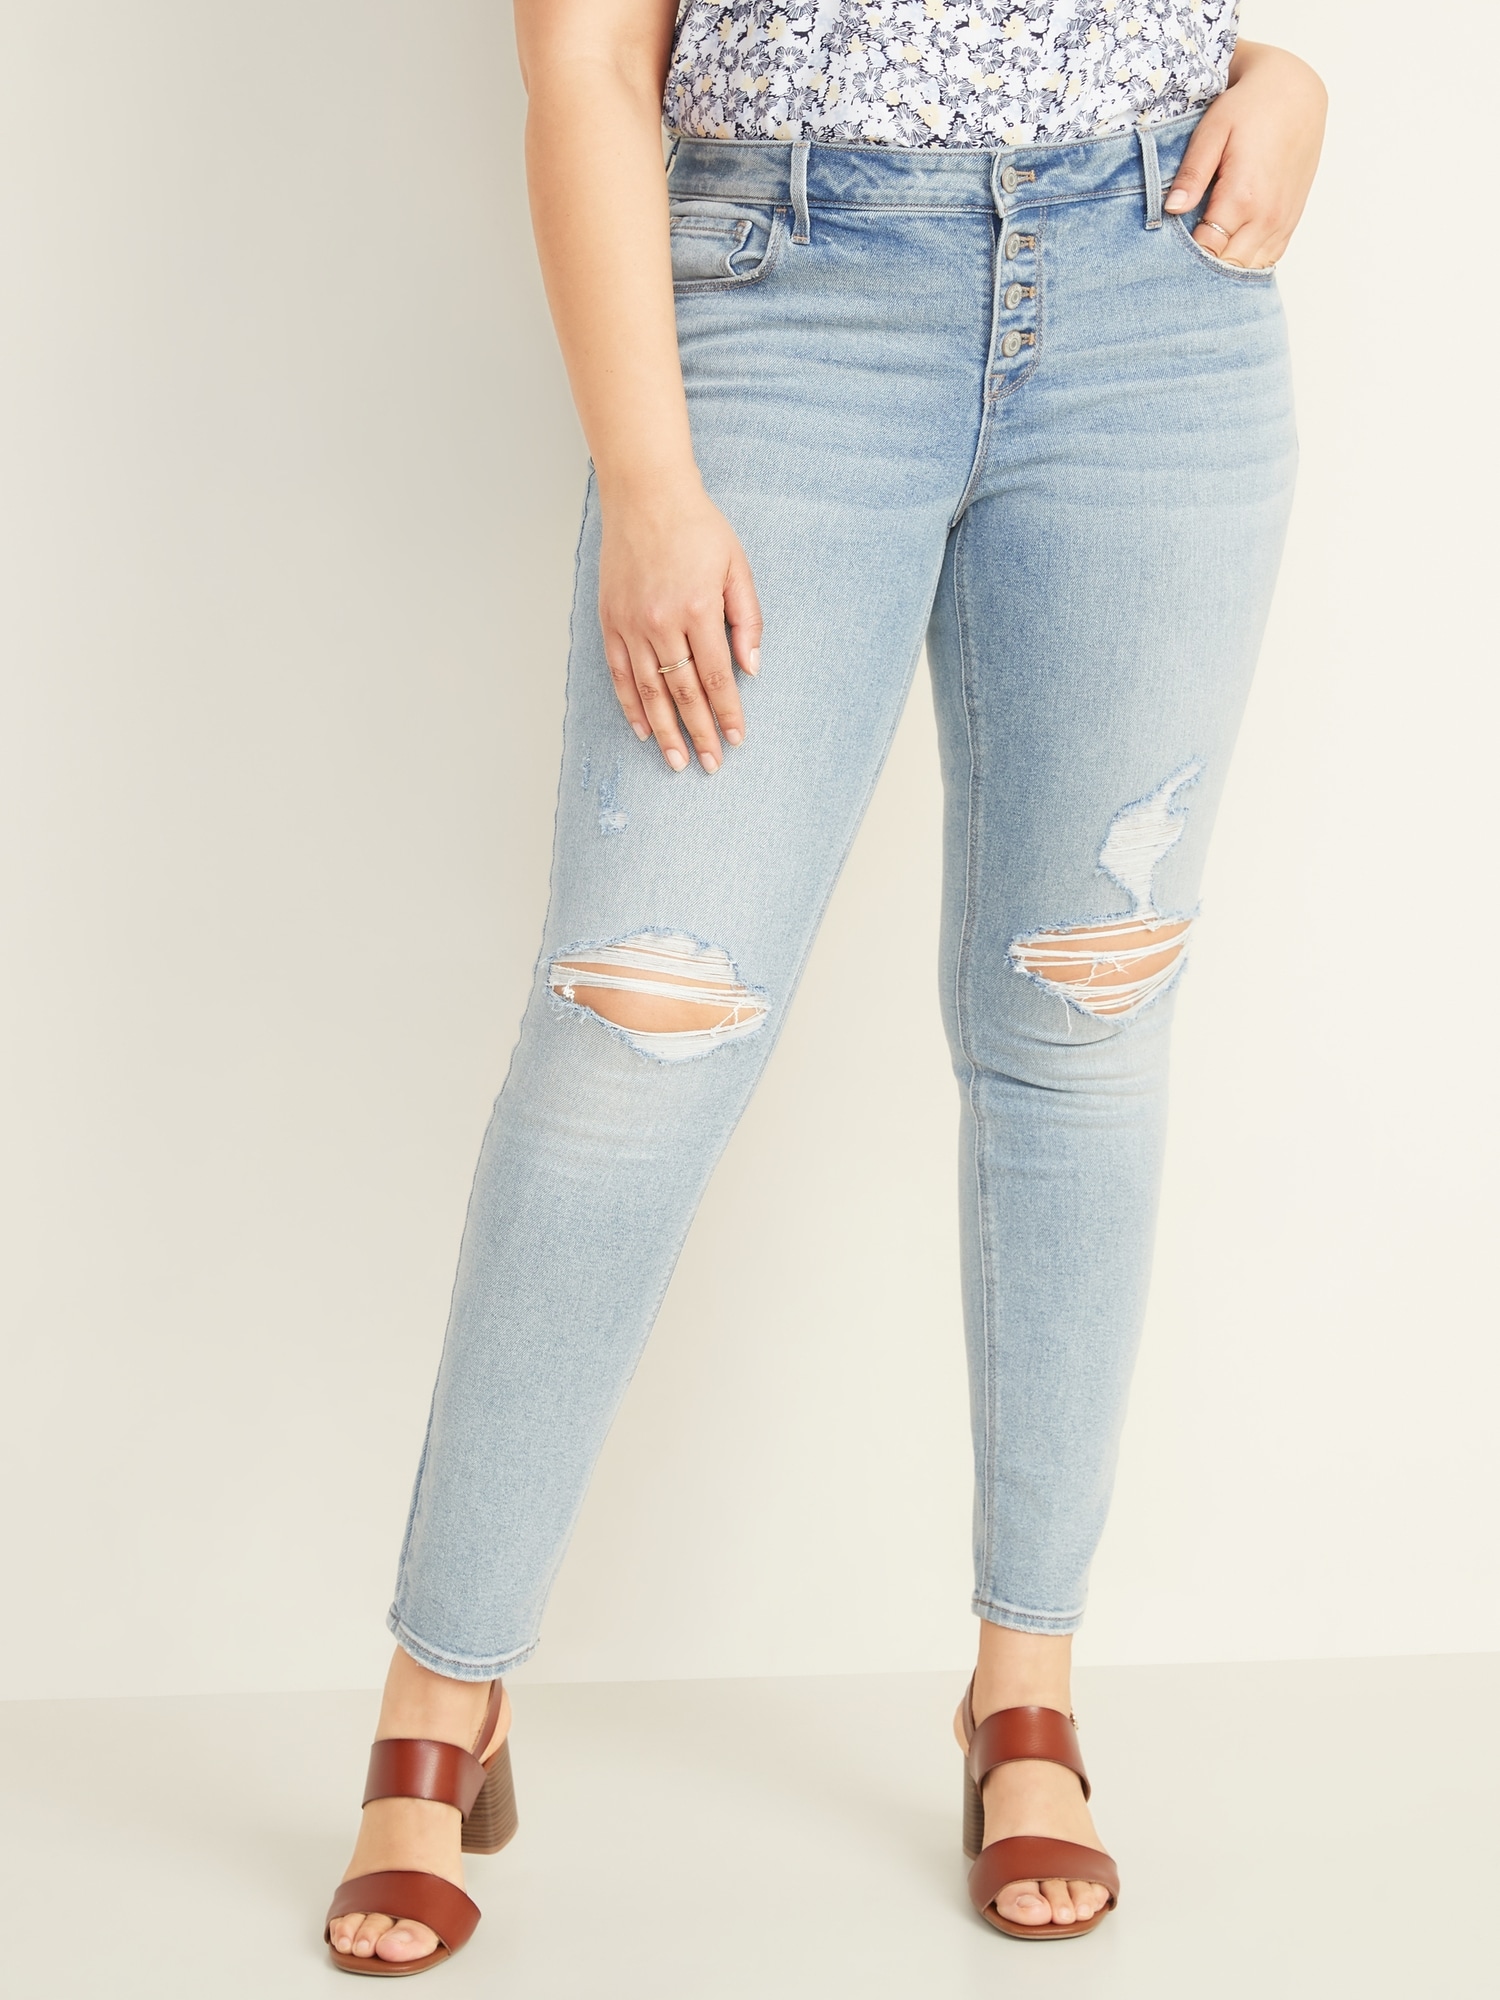 old navy rockstar jeans low rise